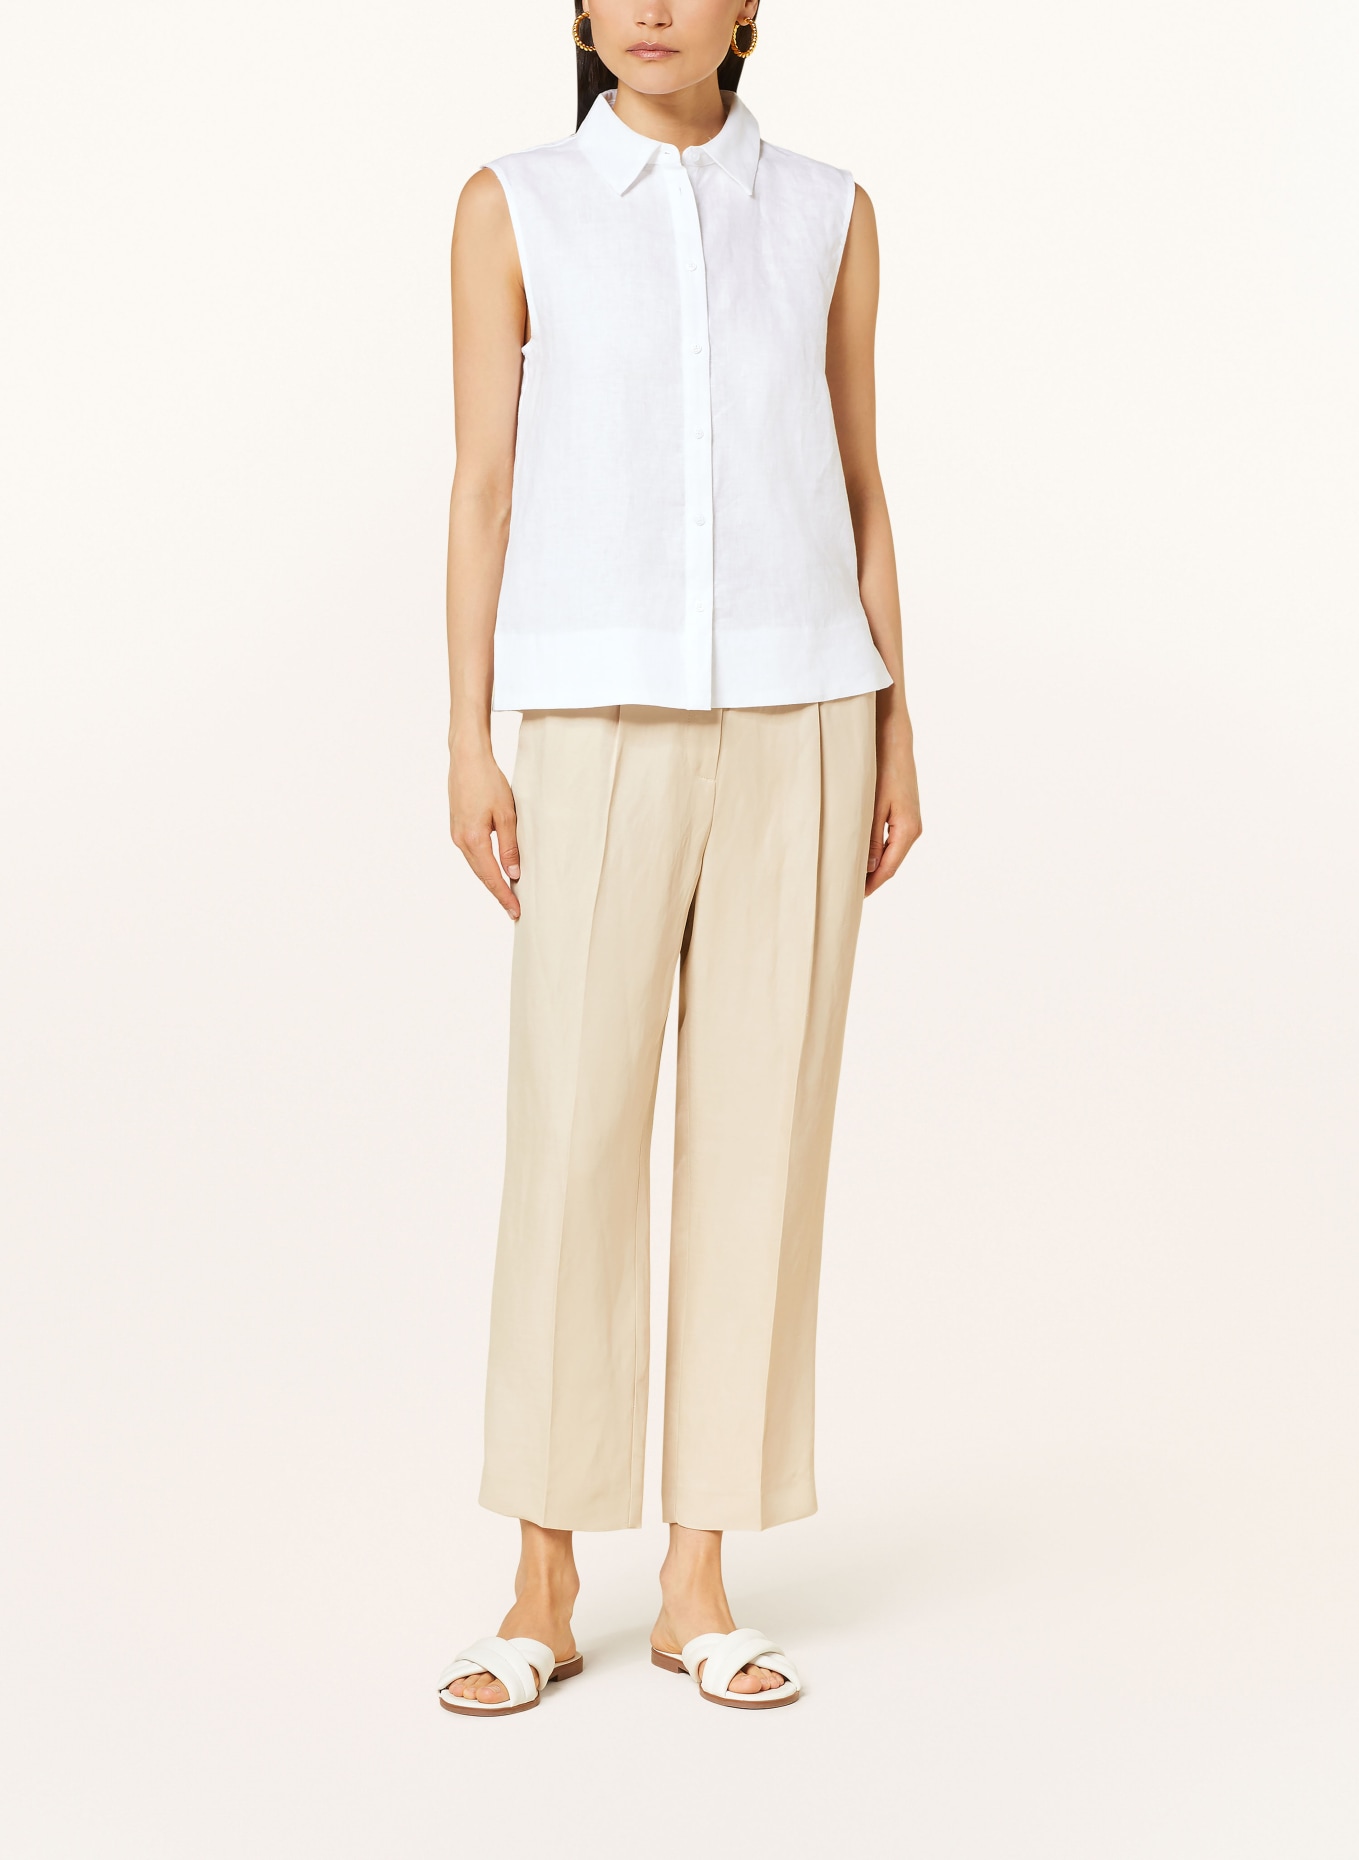 HOBBS Blouse top SALEM made of linen, Color: WHITE (Image 2)